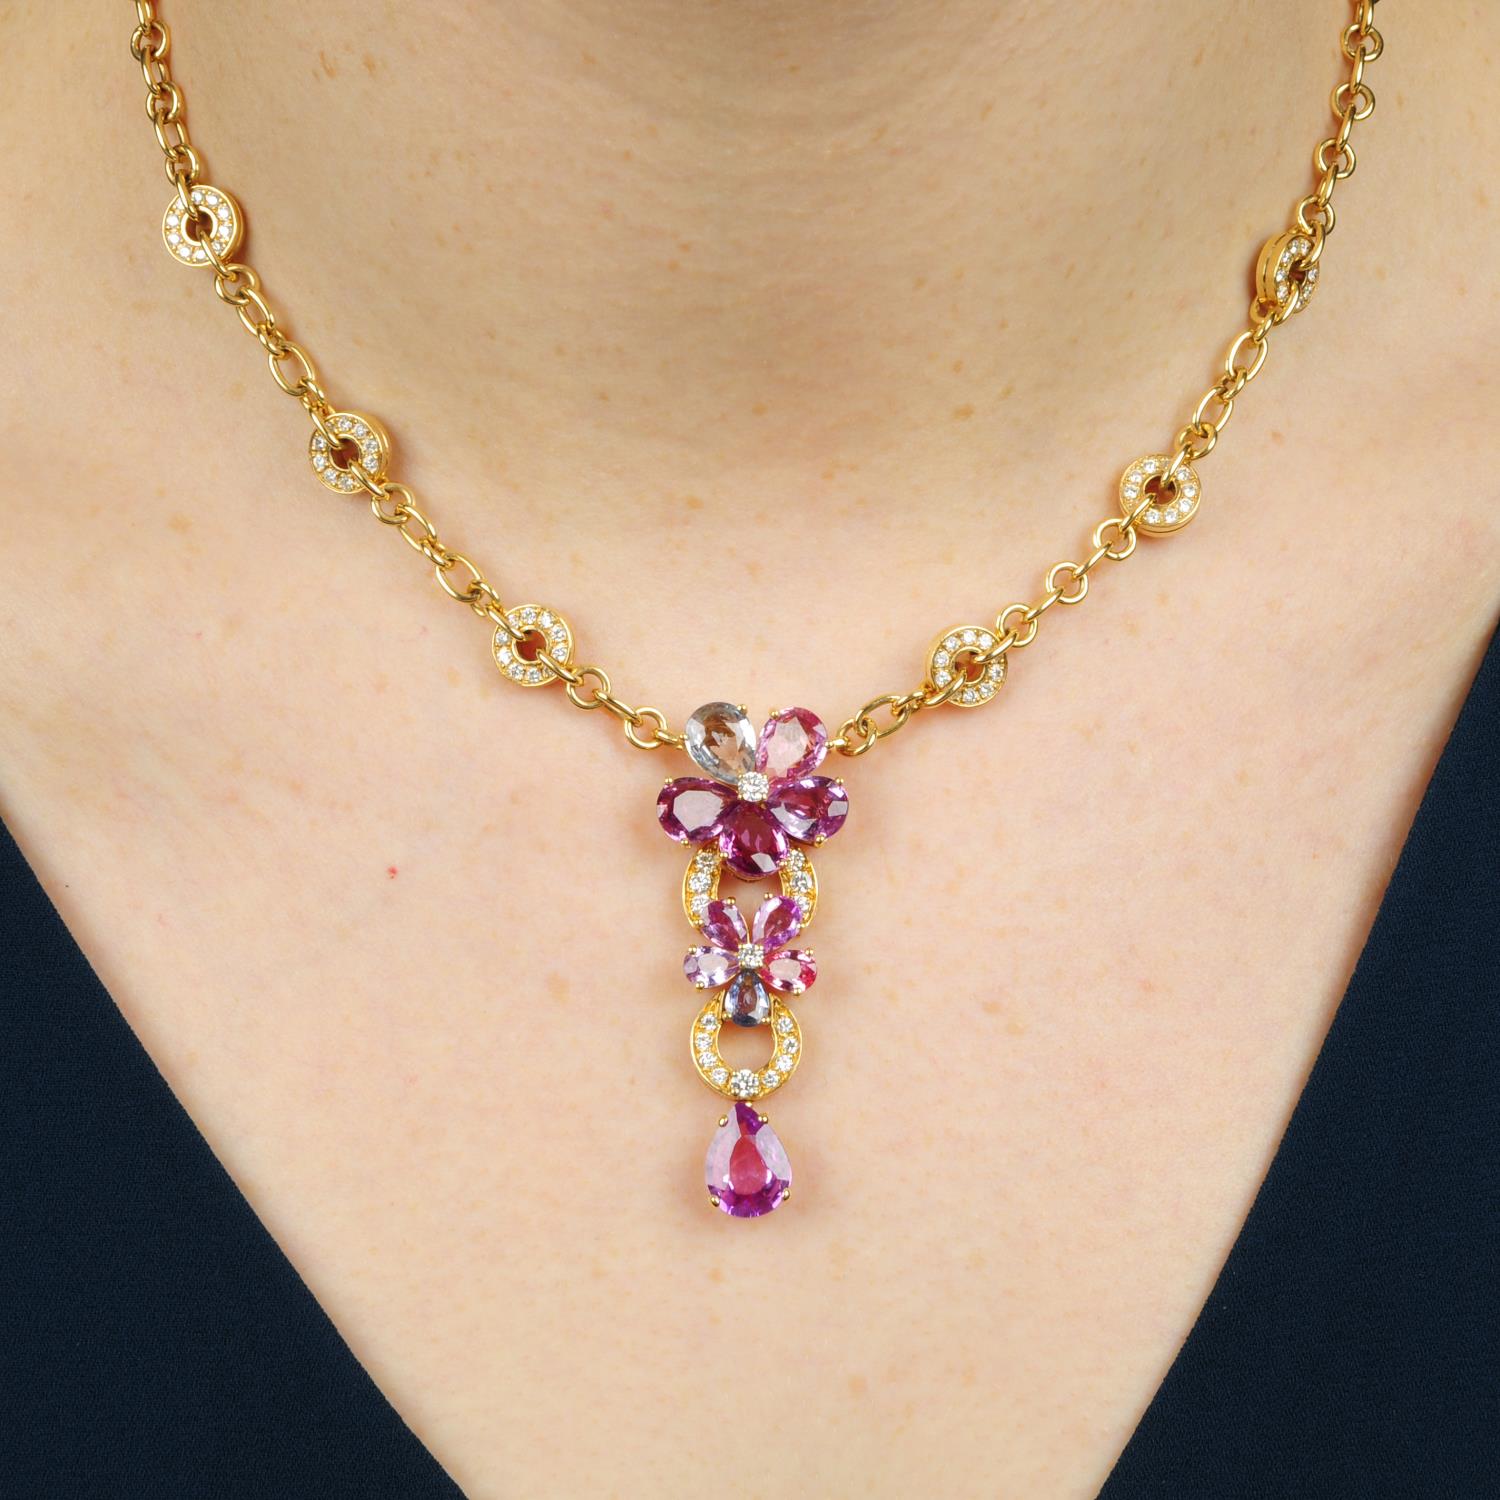 A limited edition diamond and vari-hue 'Sapphire Flower' necklace,